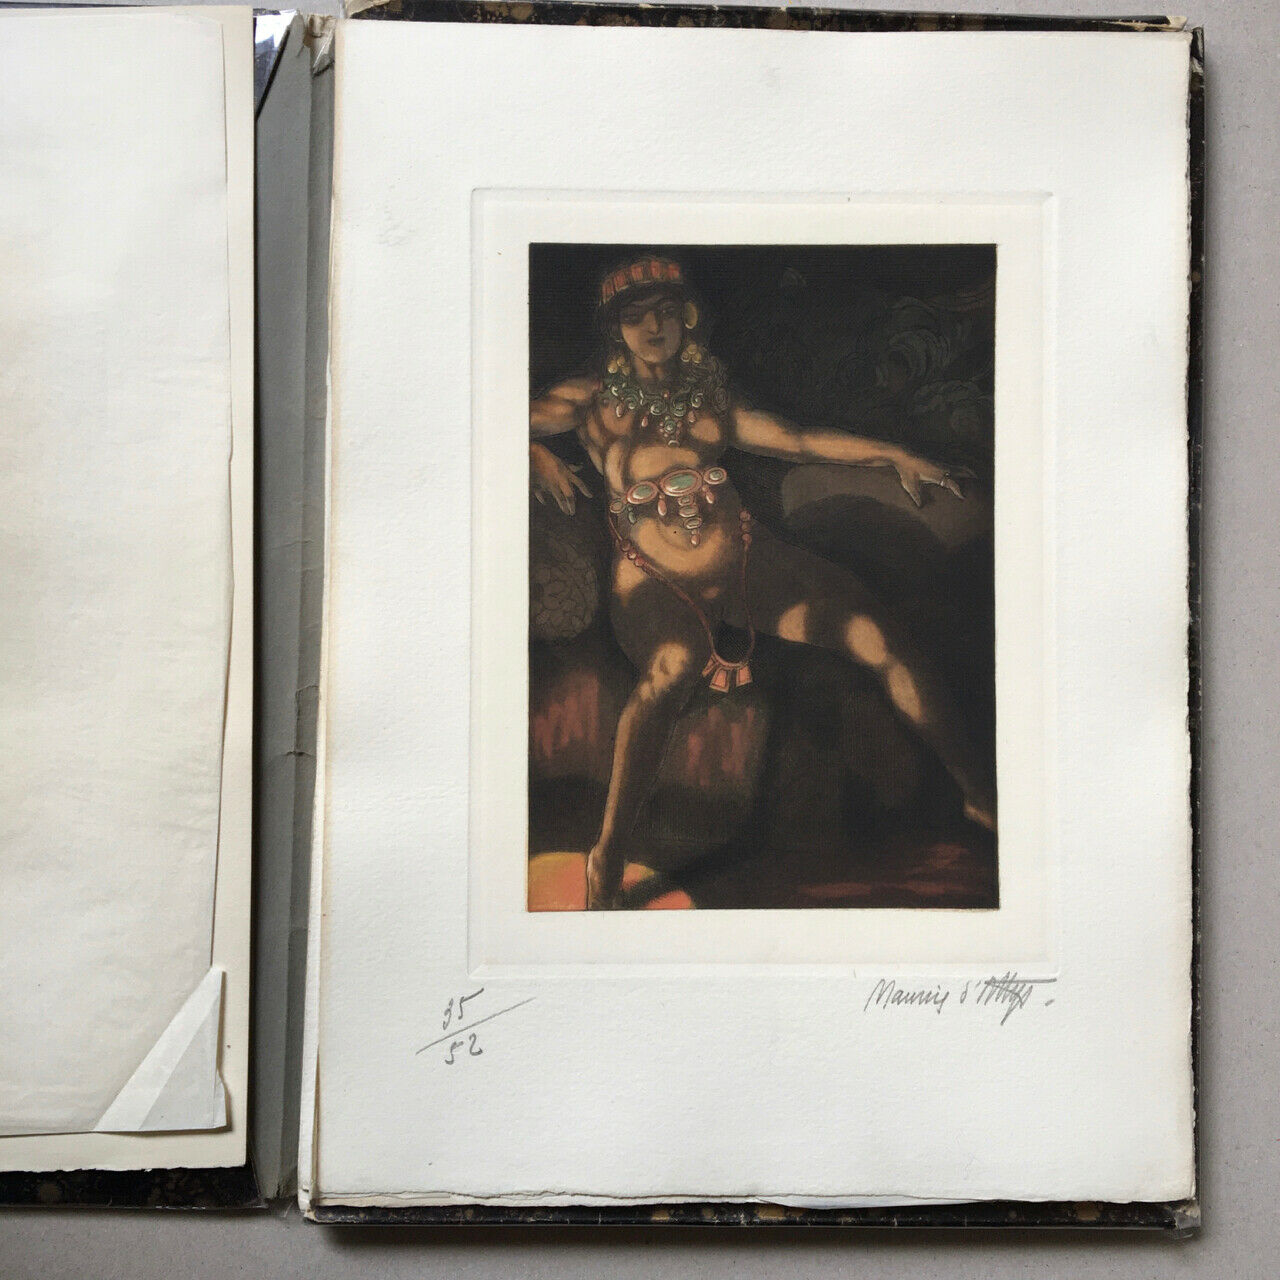 [Baudelaire] Maurice d'Attys — The condemned pieces — 18 aquatints n° 35 / 52.